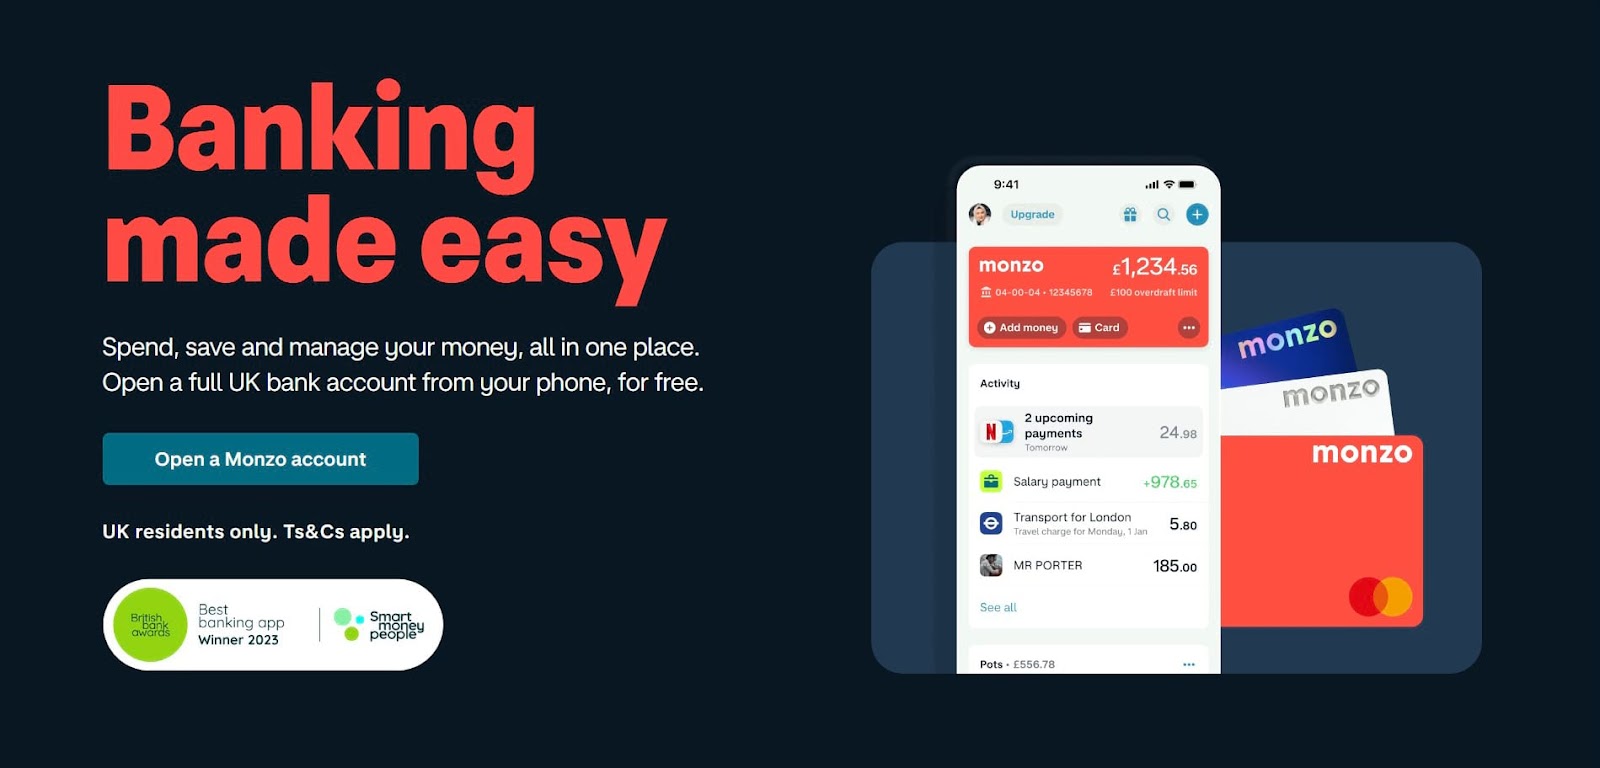 Monzo's ad with "Banking made easy" copy